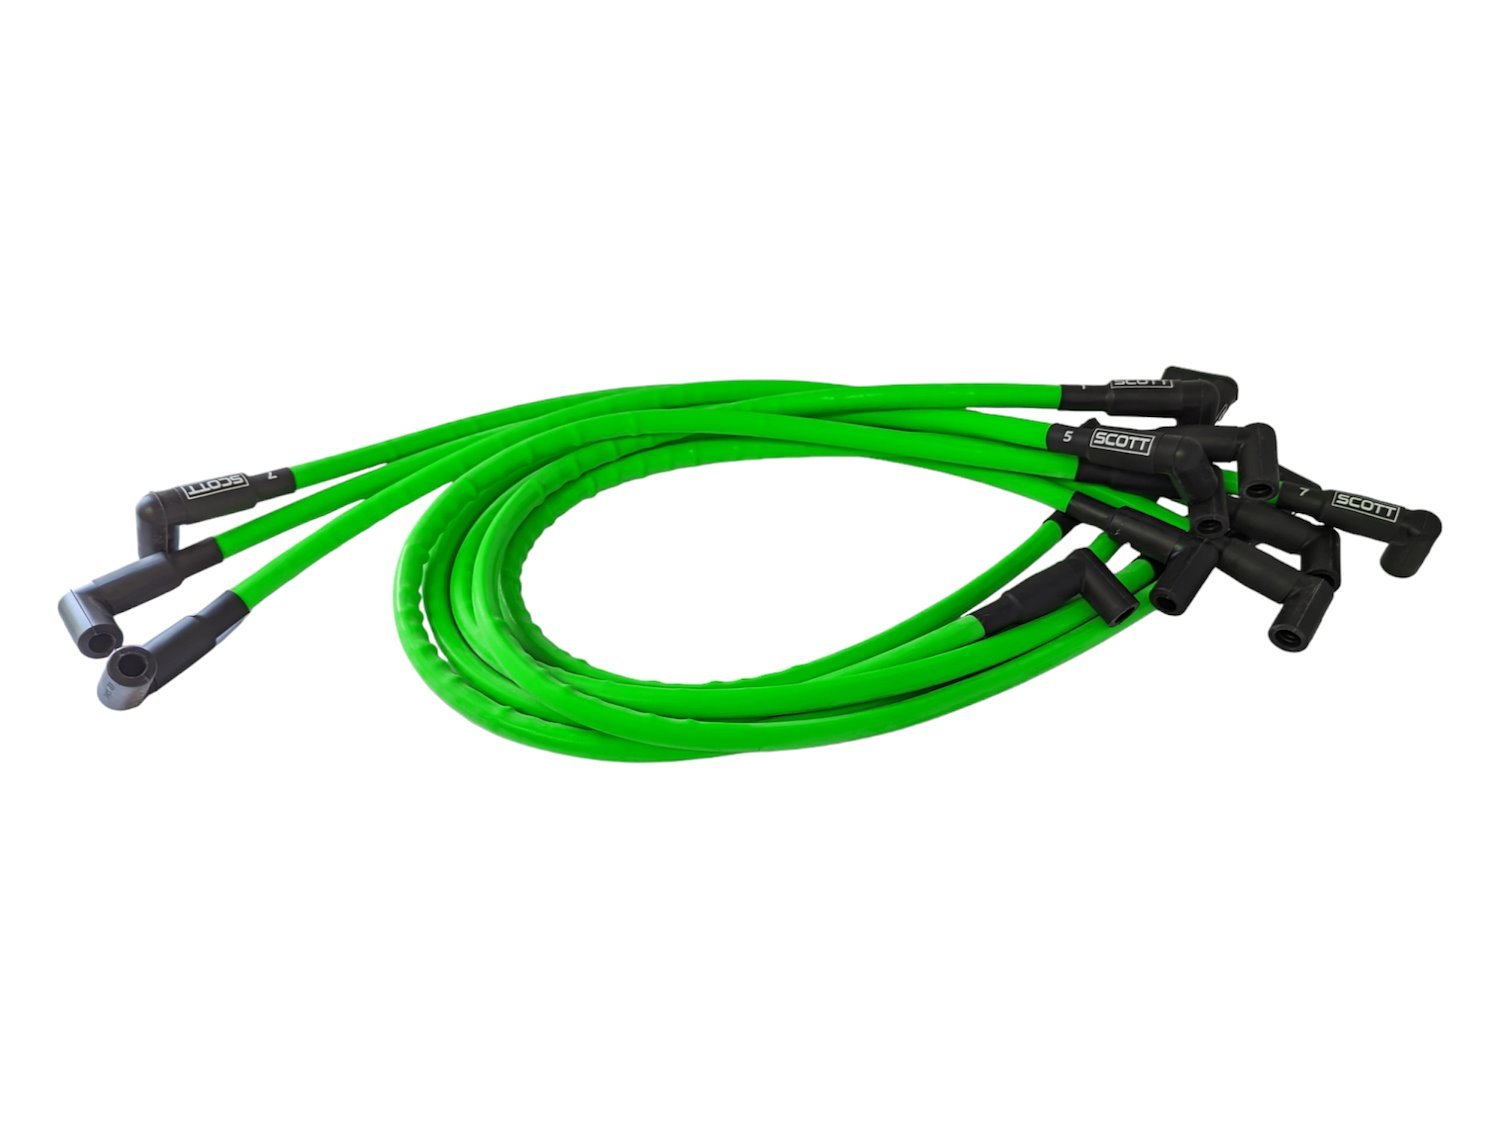 SPW-CH-407-8 High-Performance Silicone-Sleeved Spark Plug Wire Set for Small Block Chevy, Under Header [Fluorescent Green]